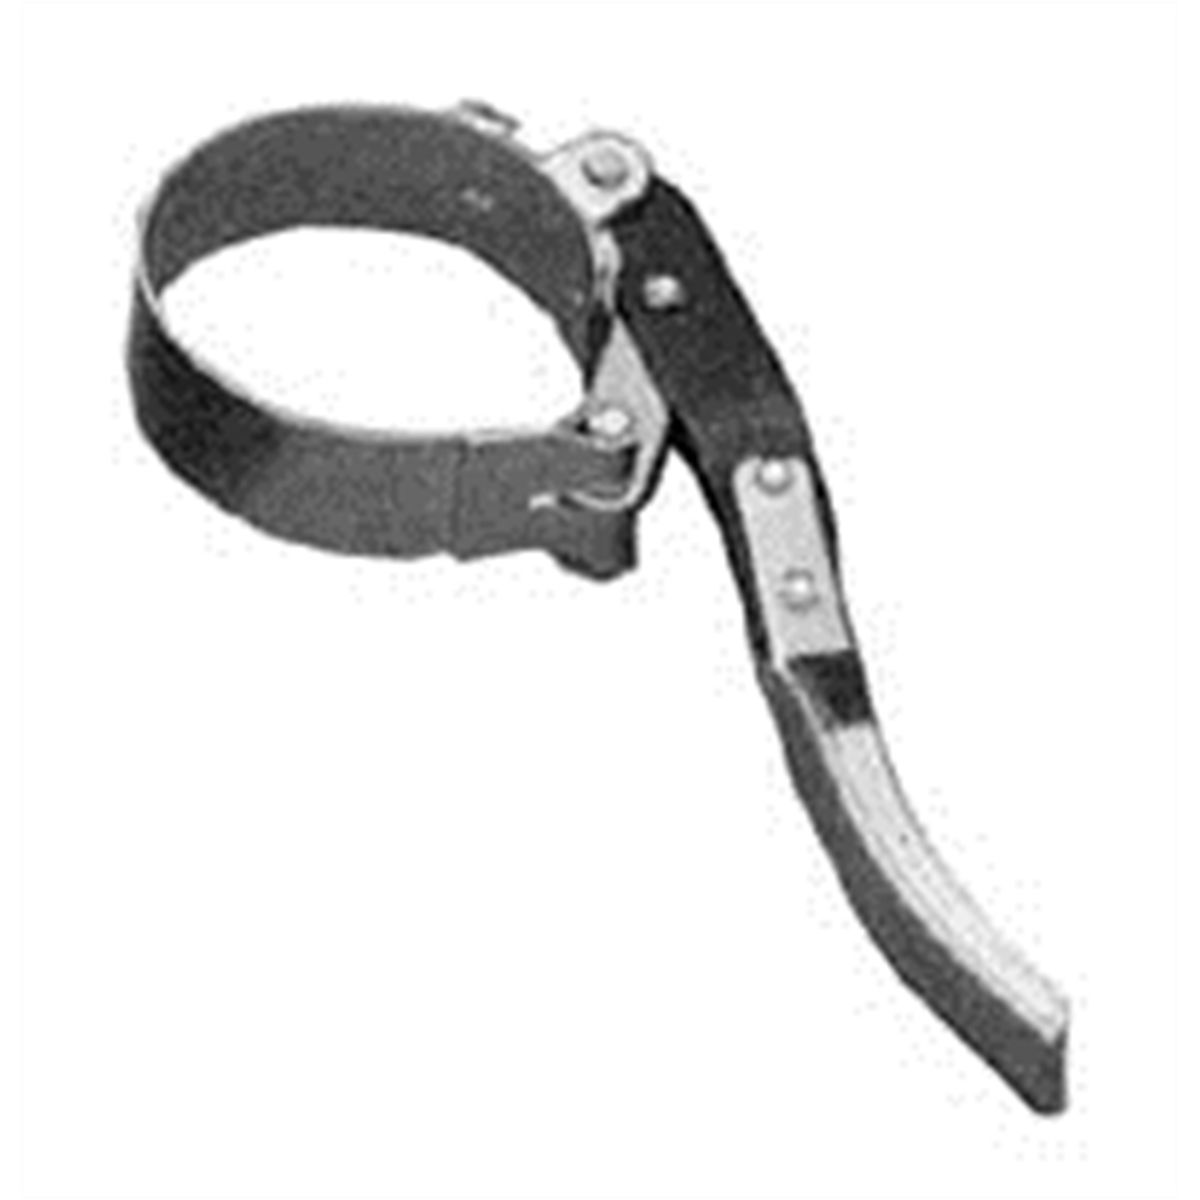 Fuel & Oil Filter Wrench 2-1/4 to 2-9/16 Inch